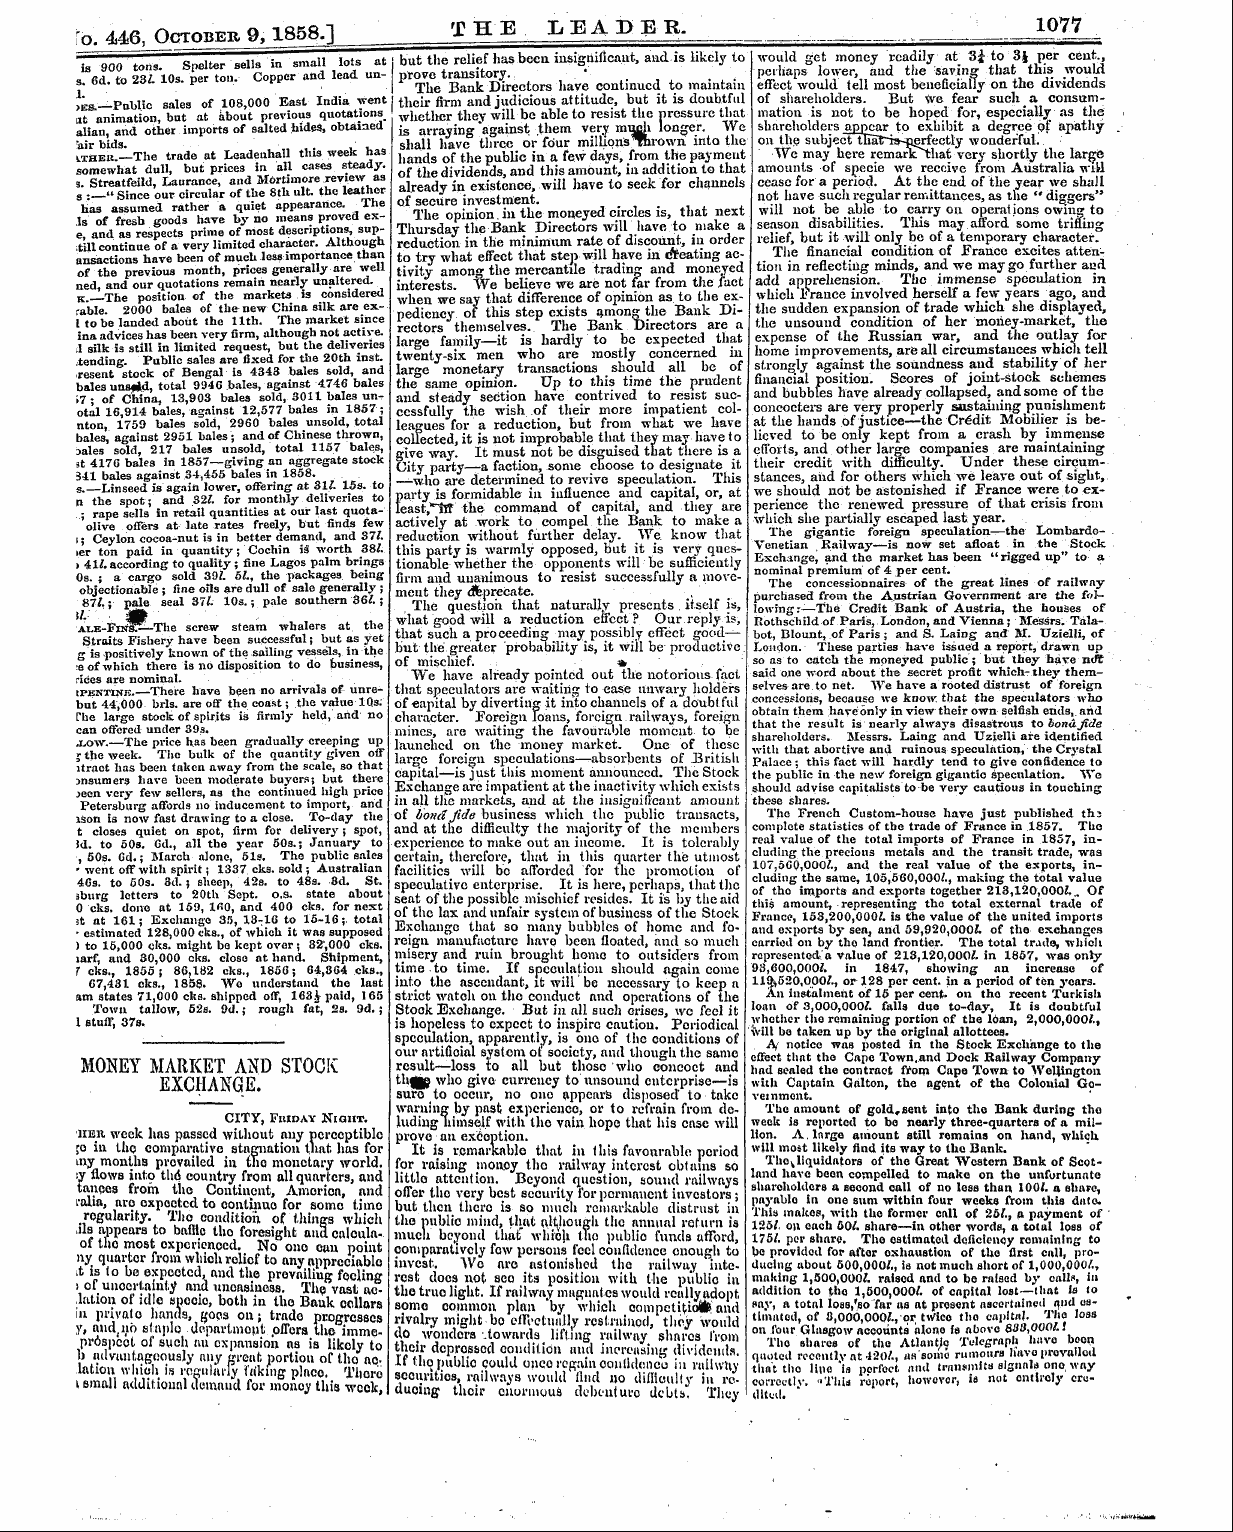 Leader (1850-1860): jS F Y, 1st edition: 29